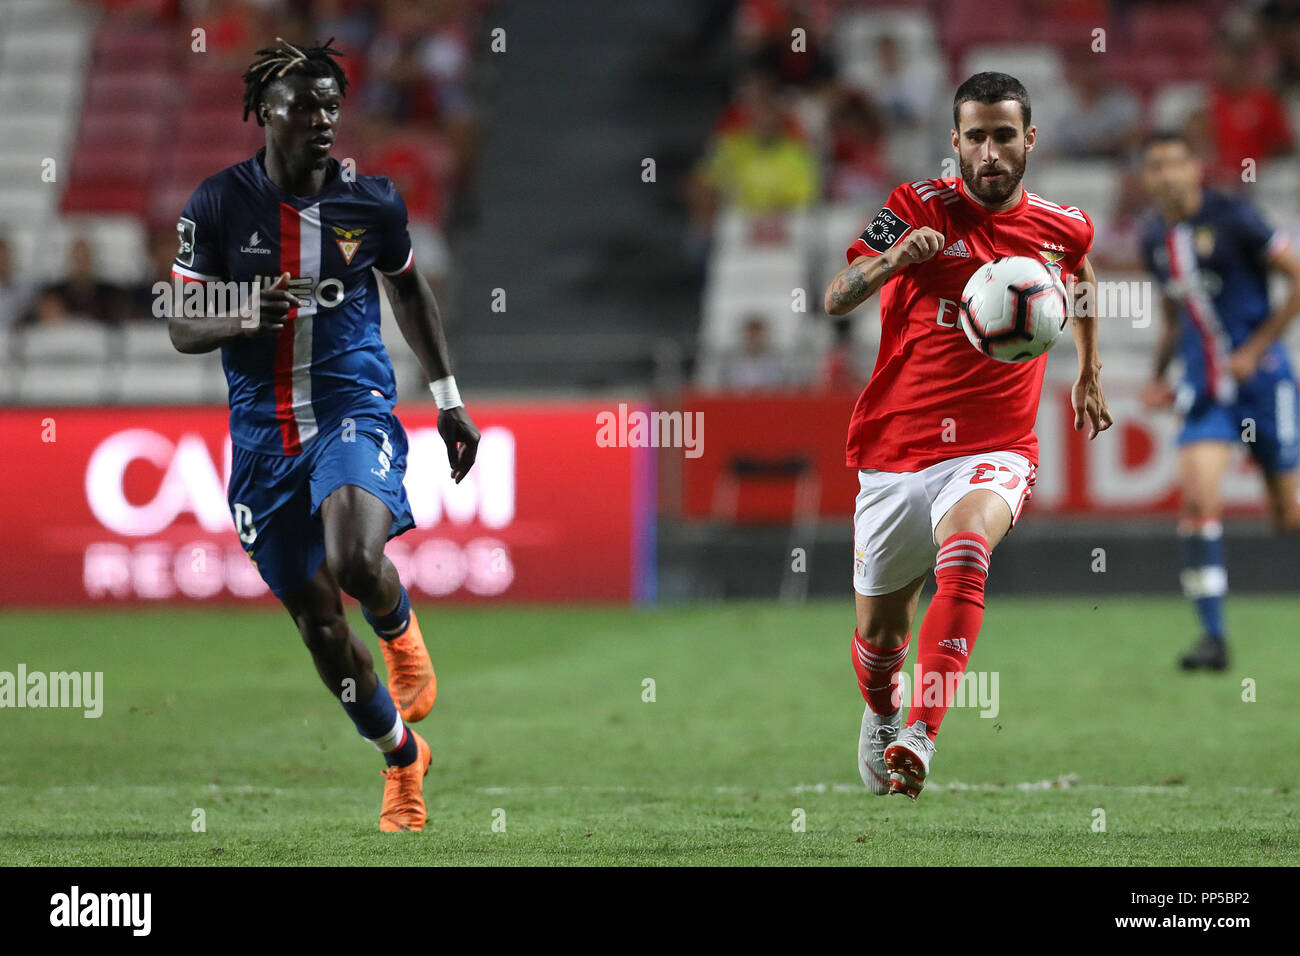 Lisbon, Lisbon, Portugal. 23rd Sep, 2018. Rafa Silva of SL Benfica (R) with Mama Baldé of Desp. Aves (L) seen in action during the League NOS 2018/19 football match between SL Benfica vs Desp. Aves. Credit: David Martins/SOPA Images/ZUMA Wire/Alamy Live News Stock Photo